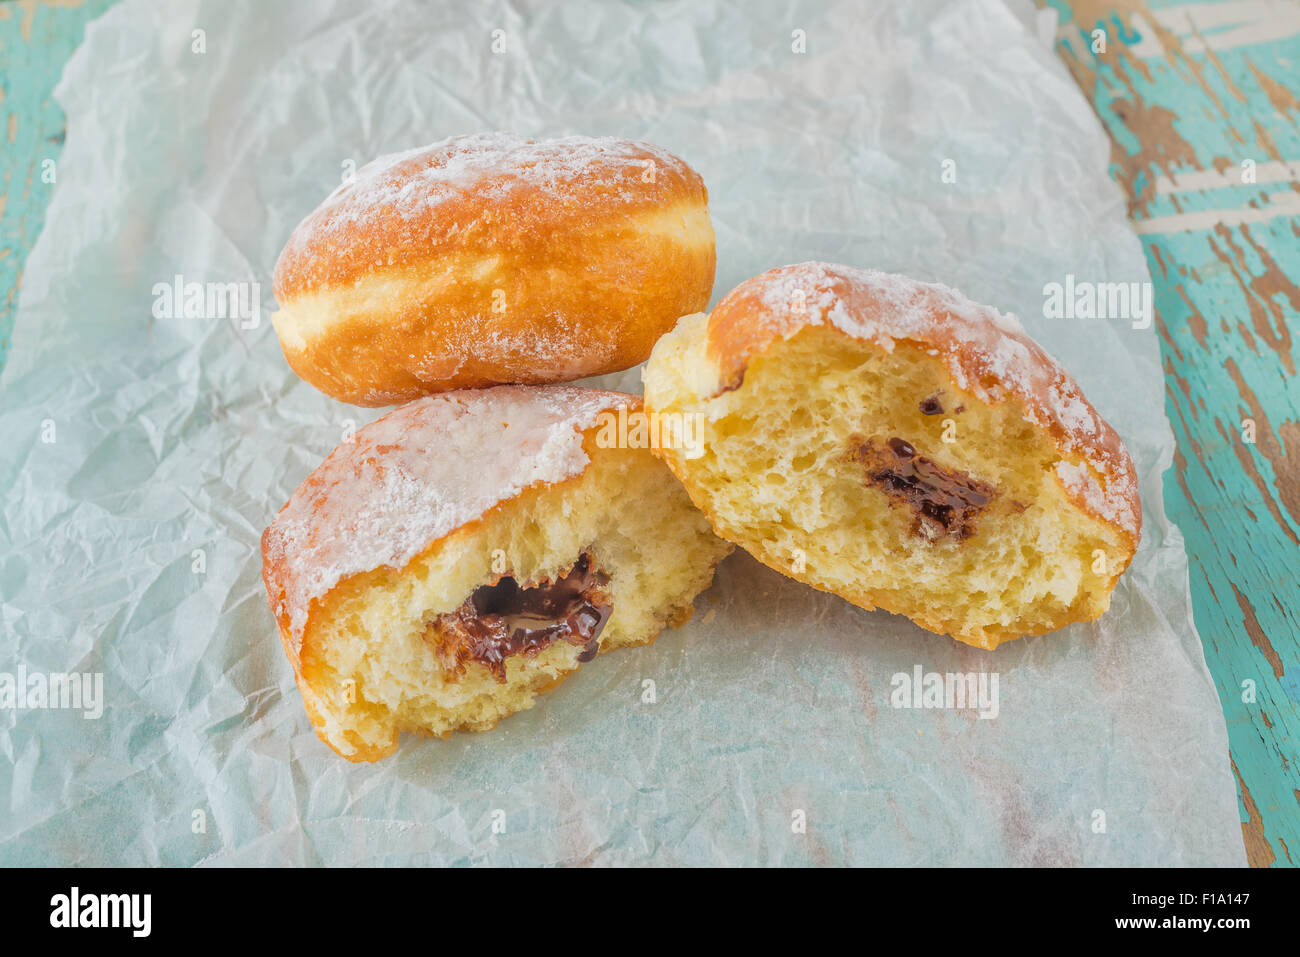 Sweet sugary donuts filled with chocolate cream on rustic wooden kitchen table, tasty bakery doughnuts, selective focus Stock Photo